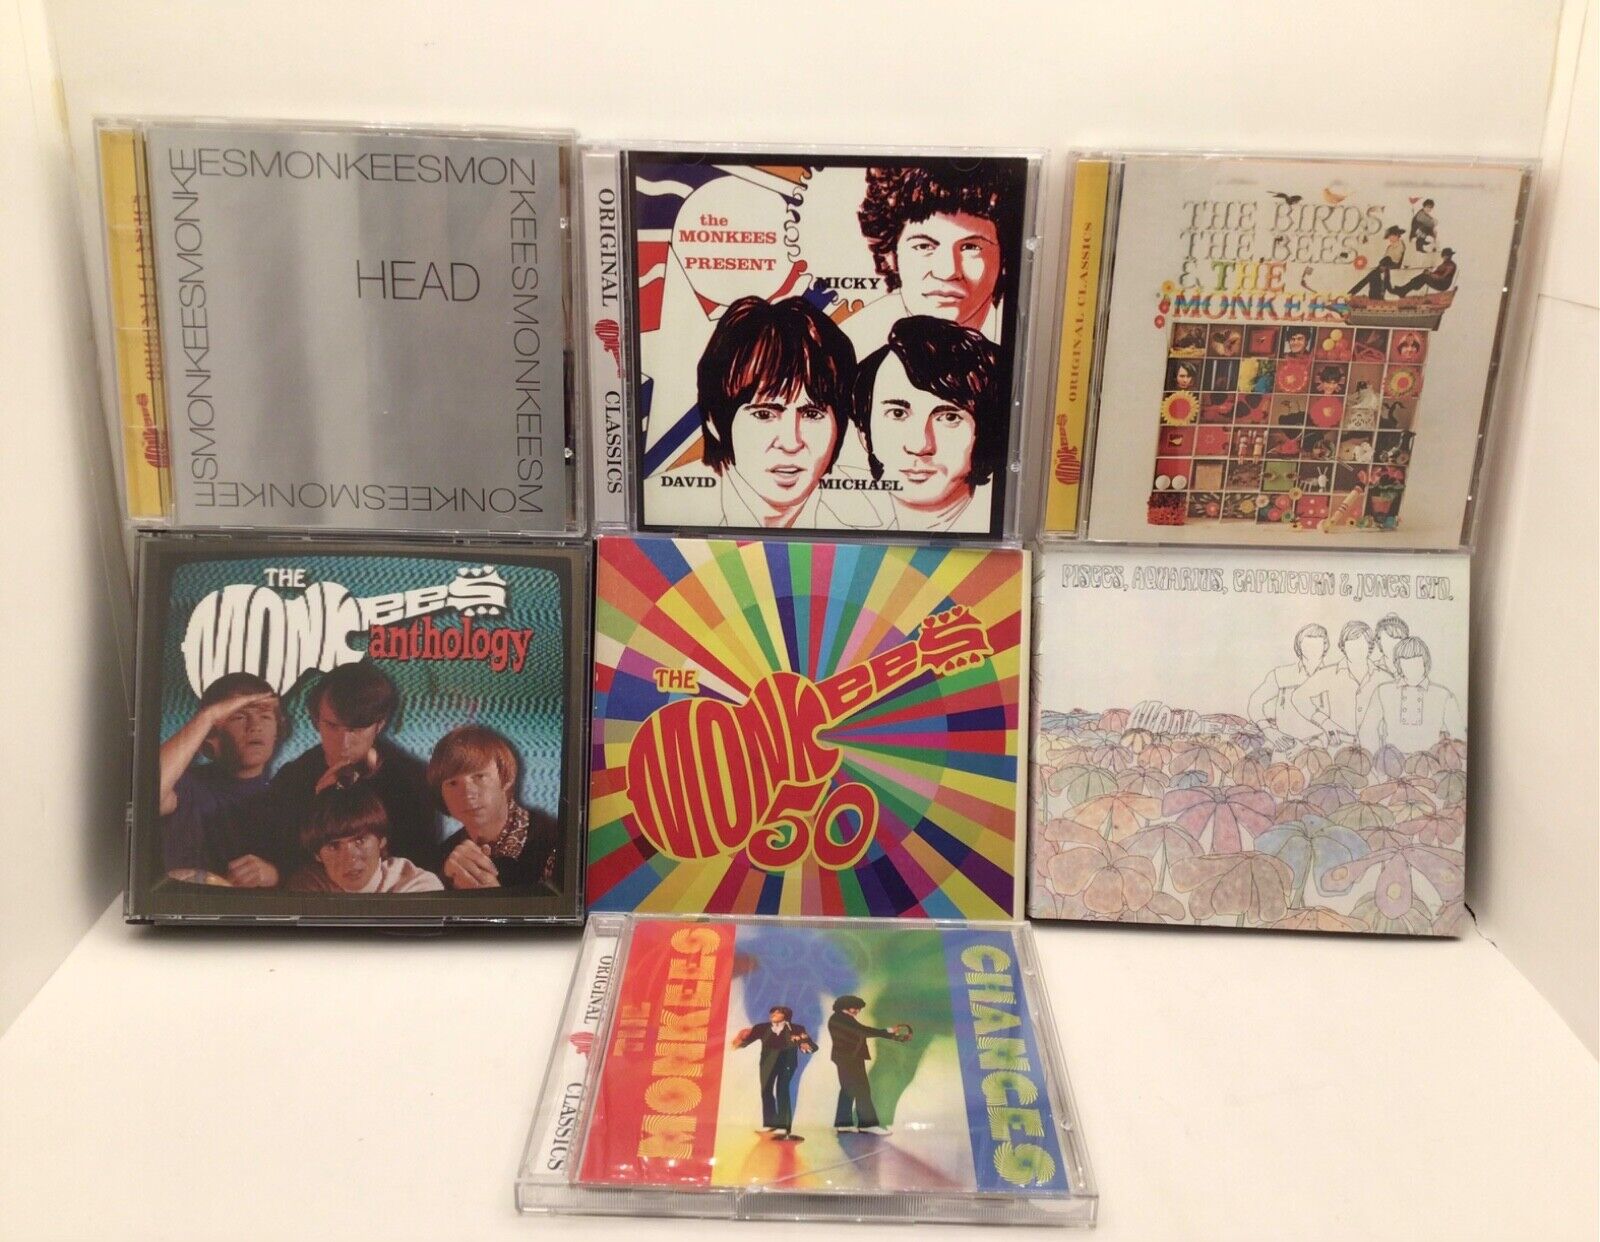 Large Lot Of Cds By The Monkees…Anthology, Monkees 50 & More 11 Total Discs